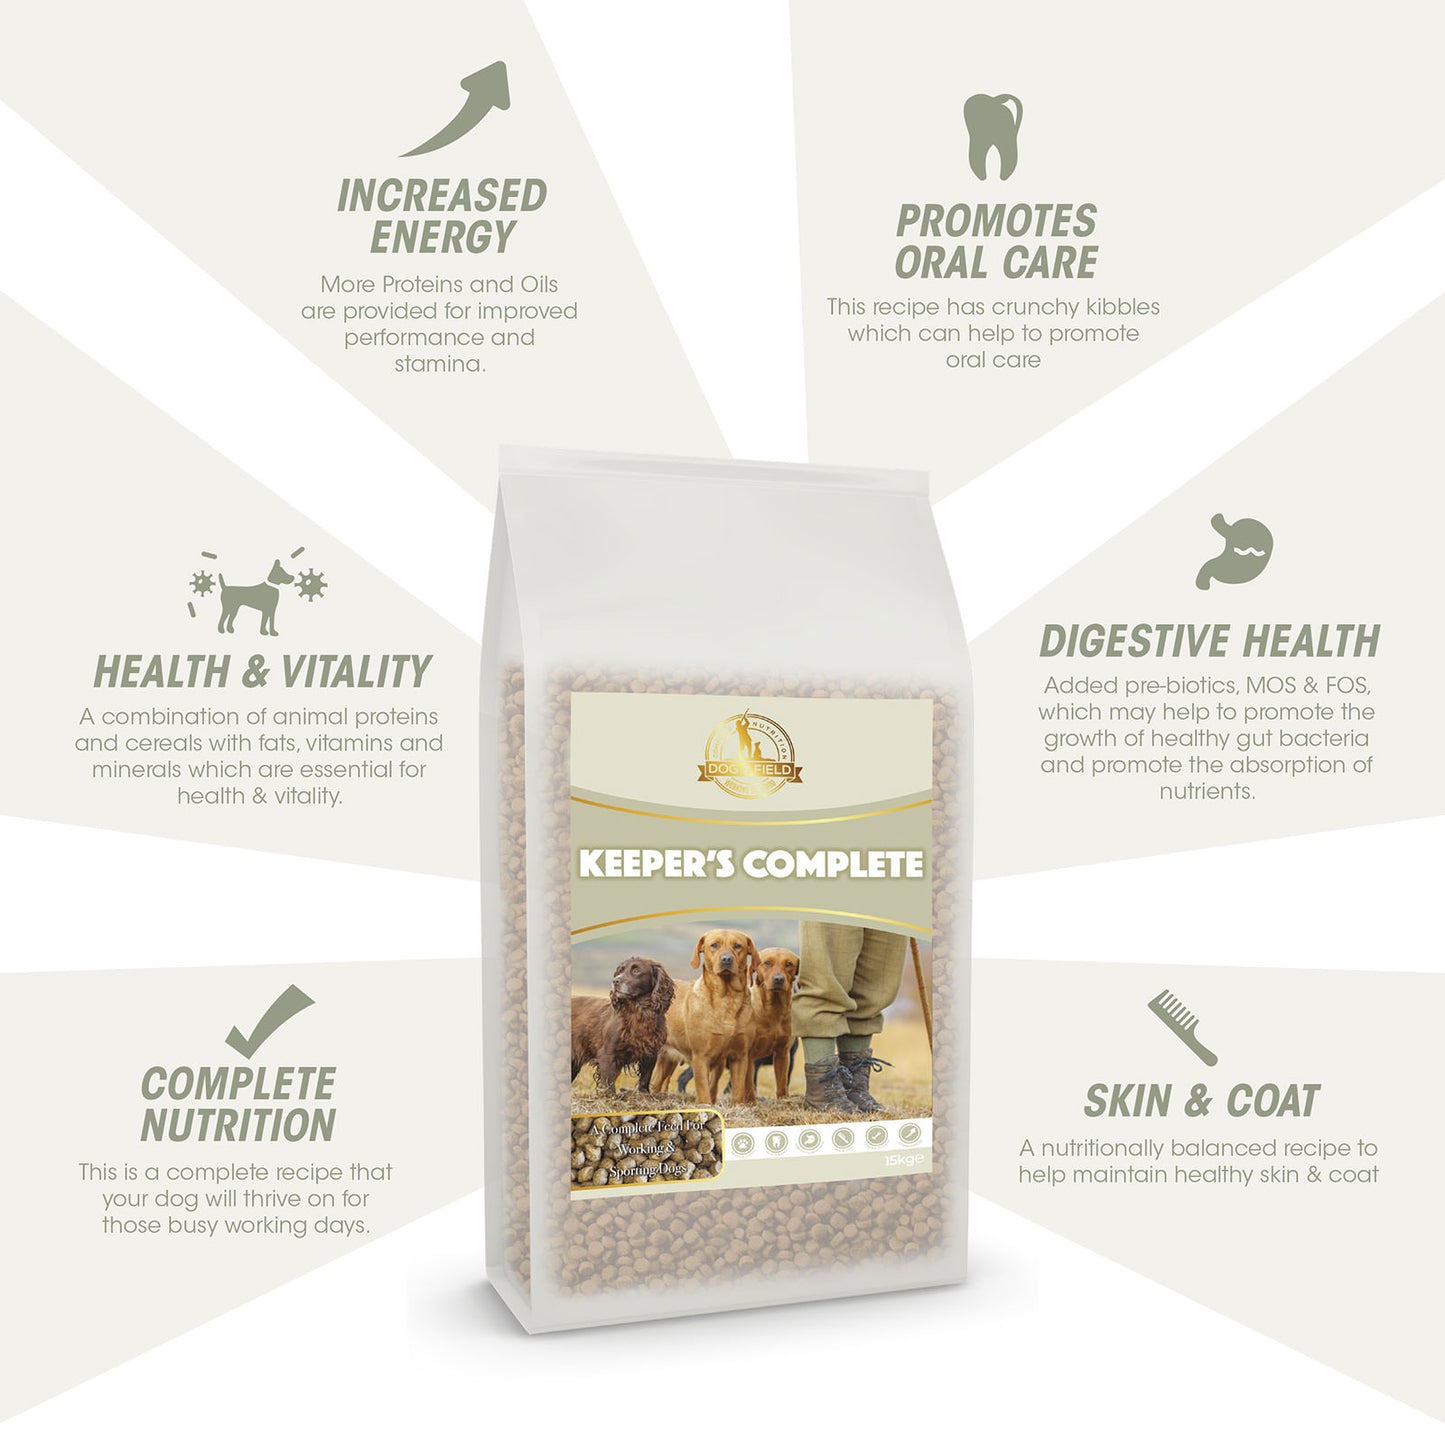 Dog and Field Keepers Complete Dry Dog Food